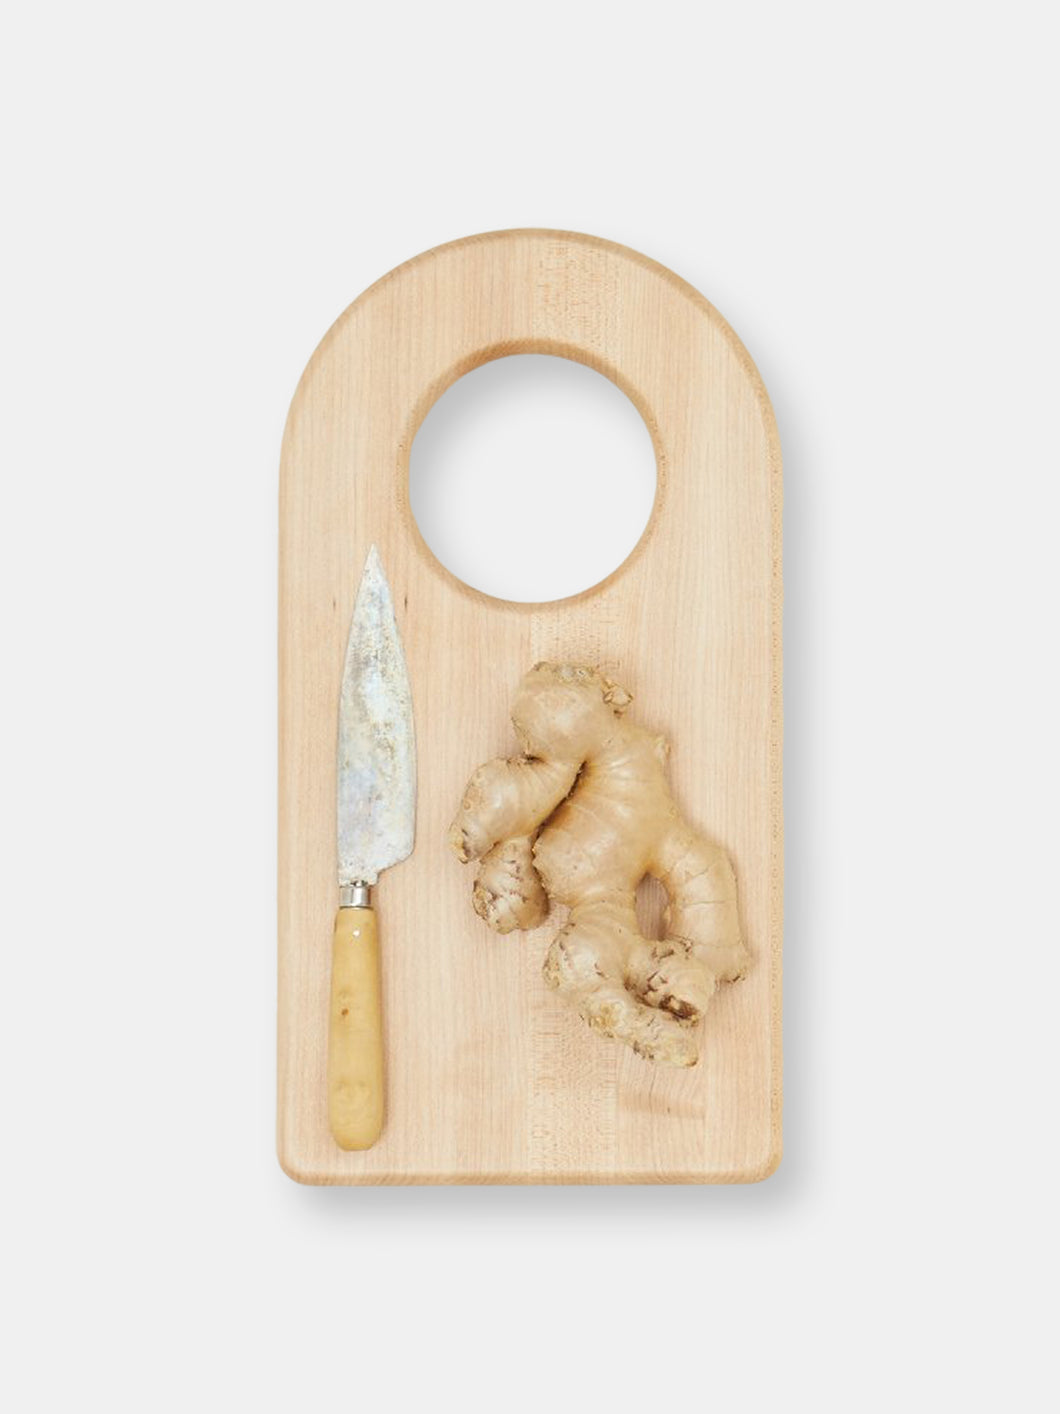 Simple Wood Kitchen Accessories - Arch Cutting Board